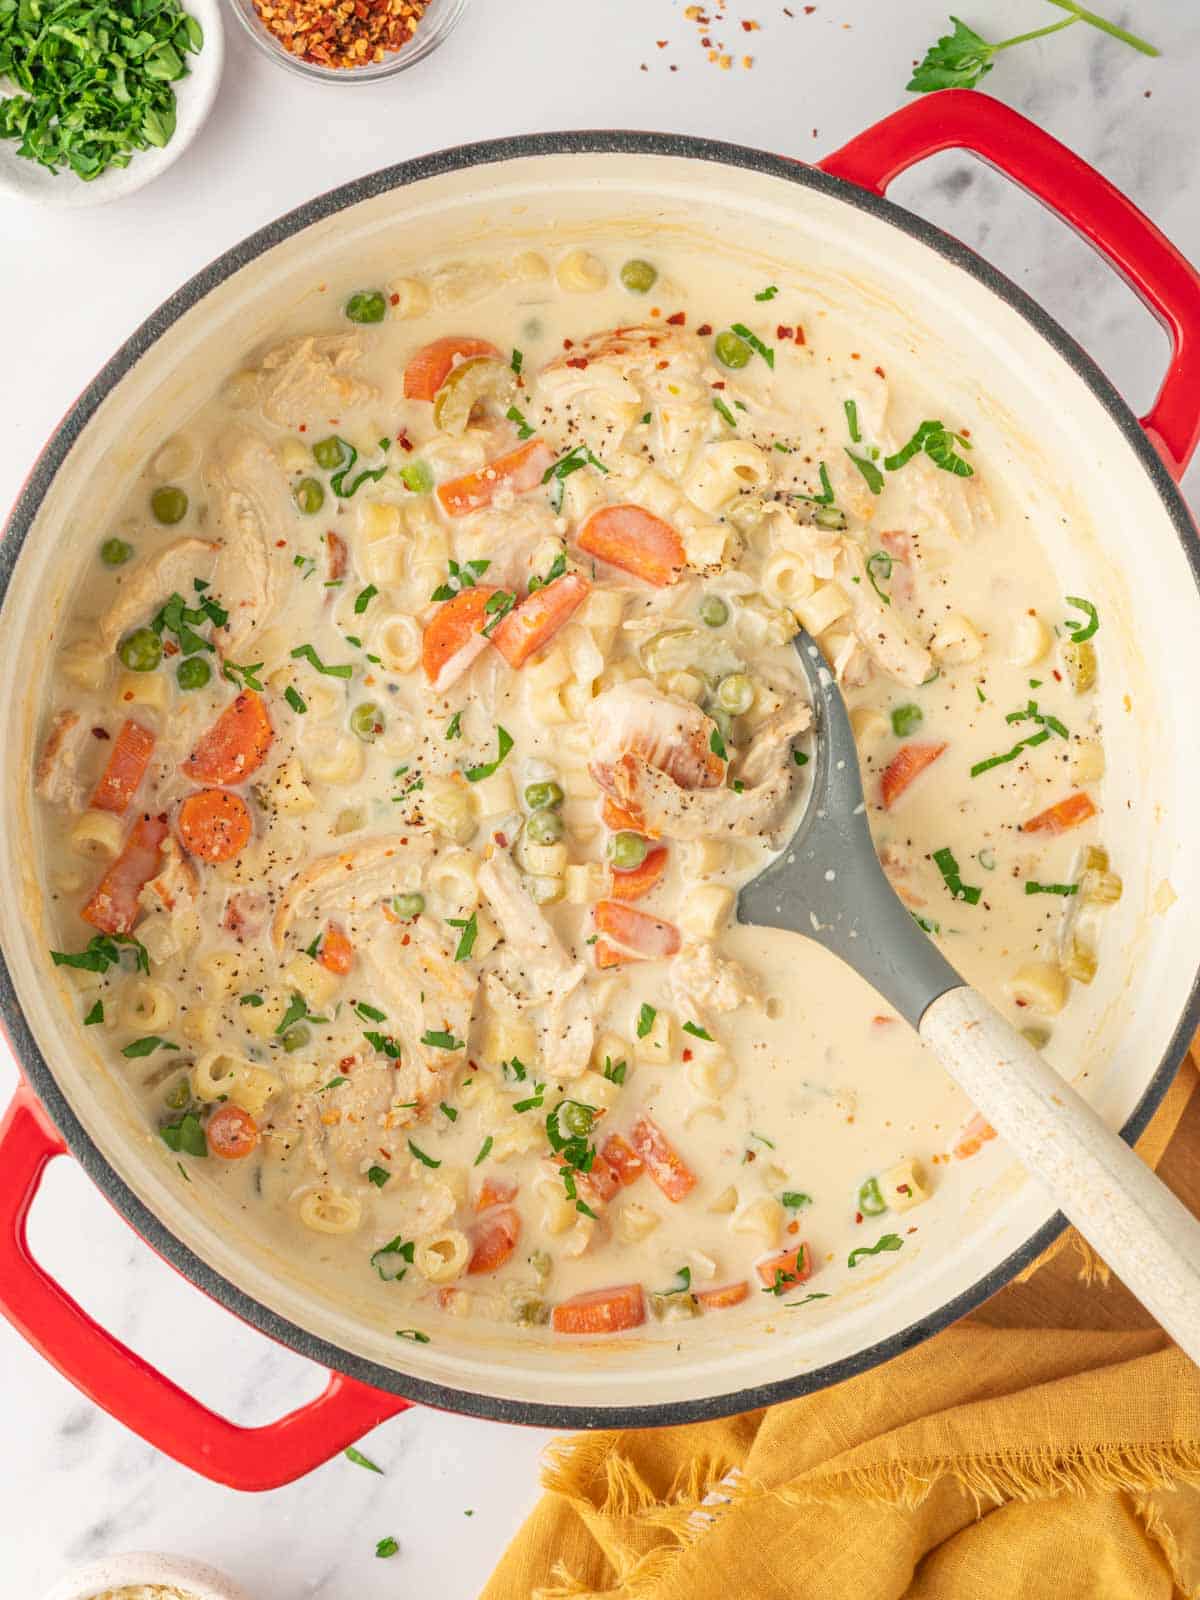 A large pot of creamy vegetable and chicken soup.